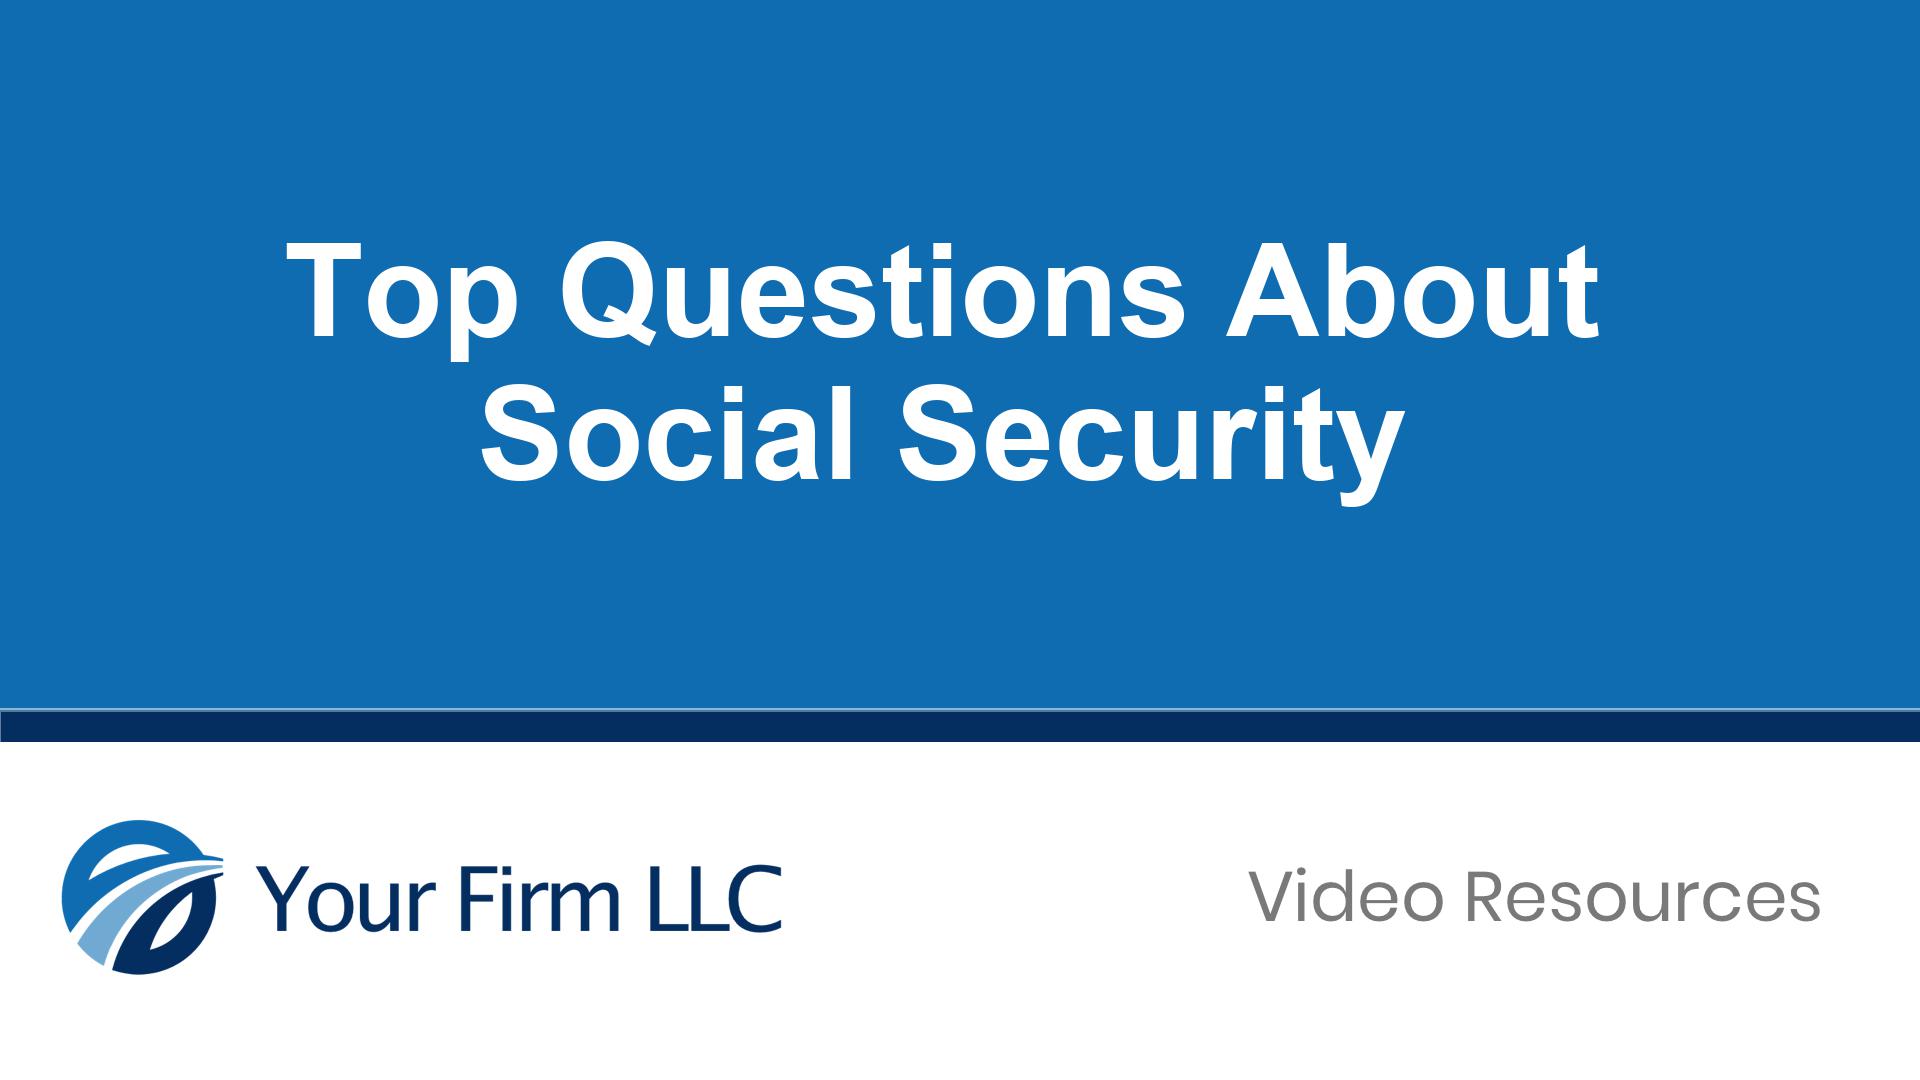 Top Questions About Social Security